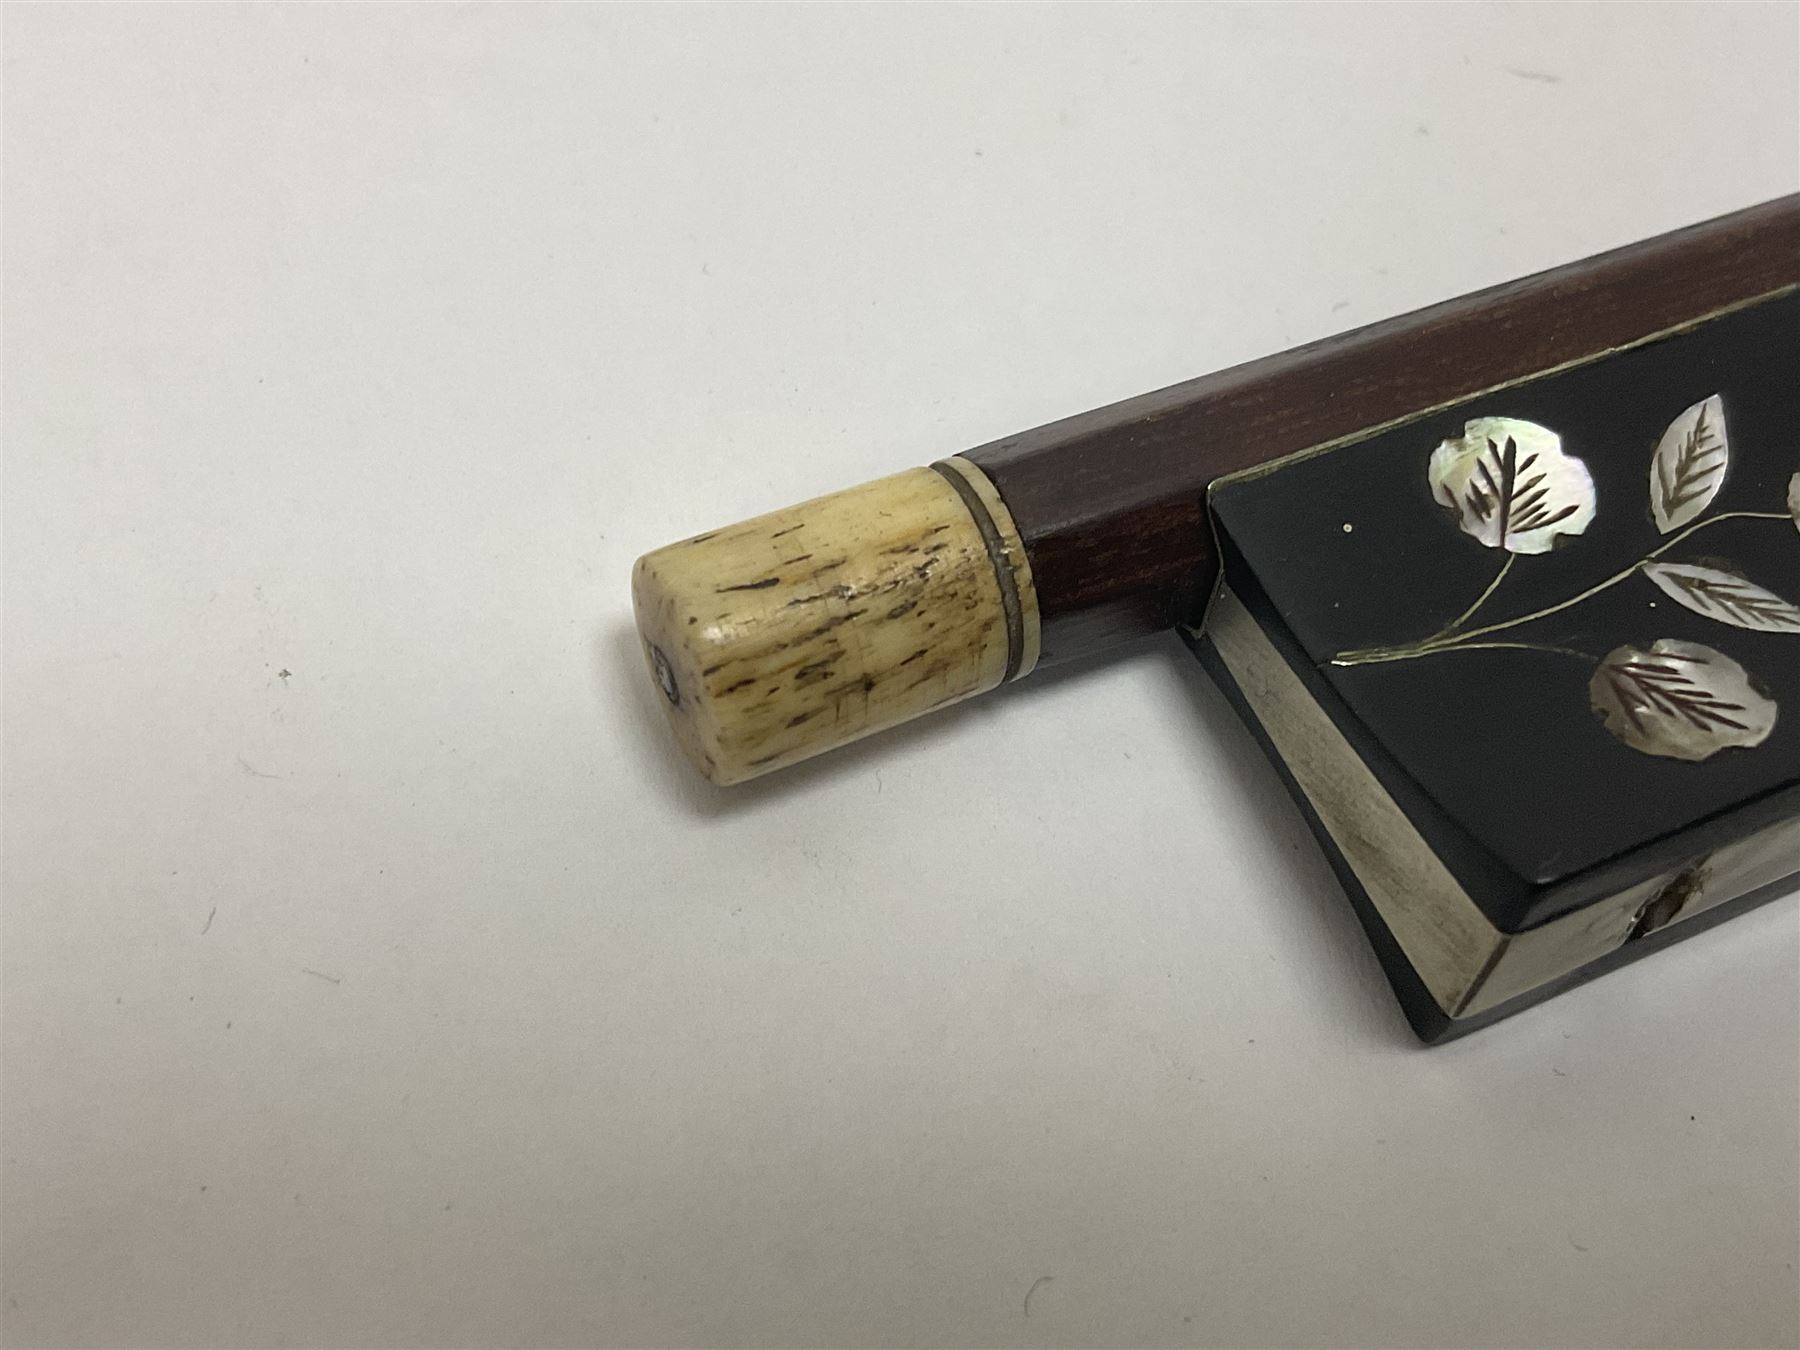 19th century wooden violin bow with a decorative mother of pearl inlay depicting flowers to the frog - Image 5 of 13